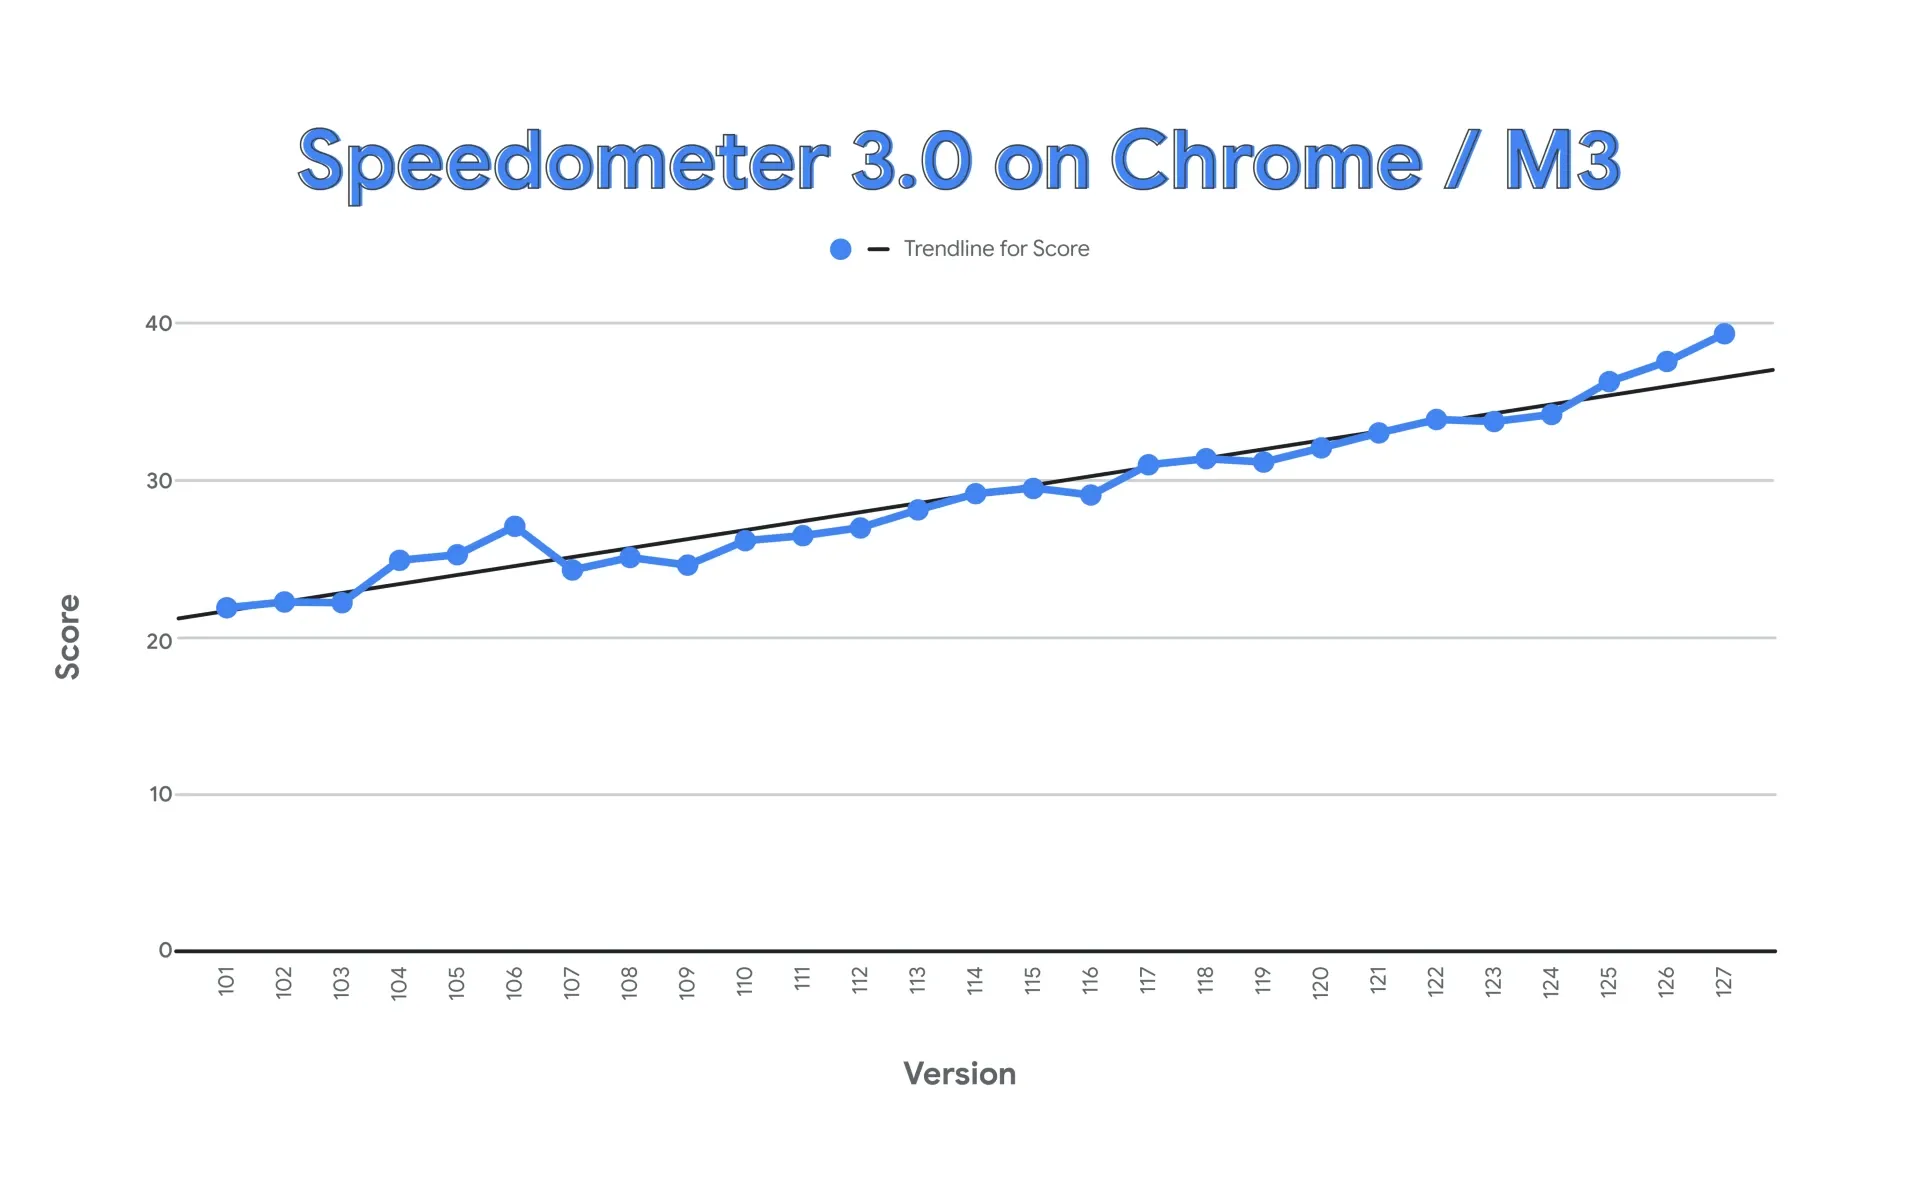 Chrome achieves the highest score ever recorded on Speedometer 3.0